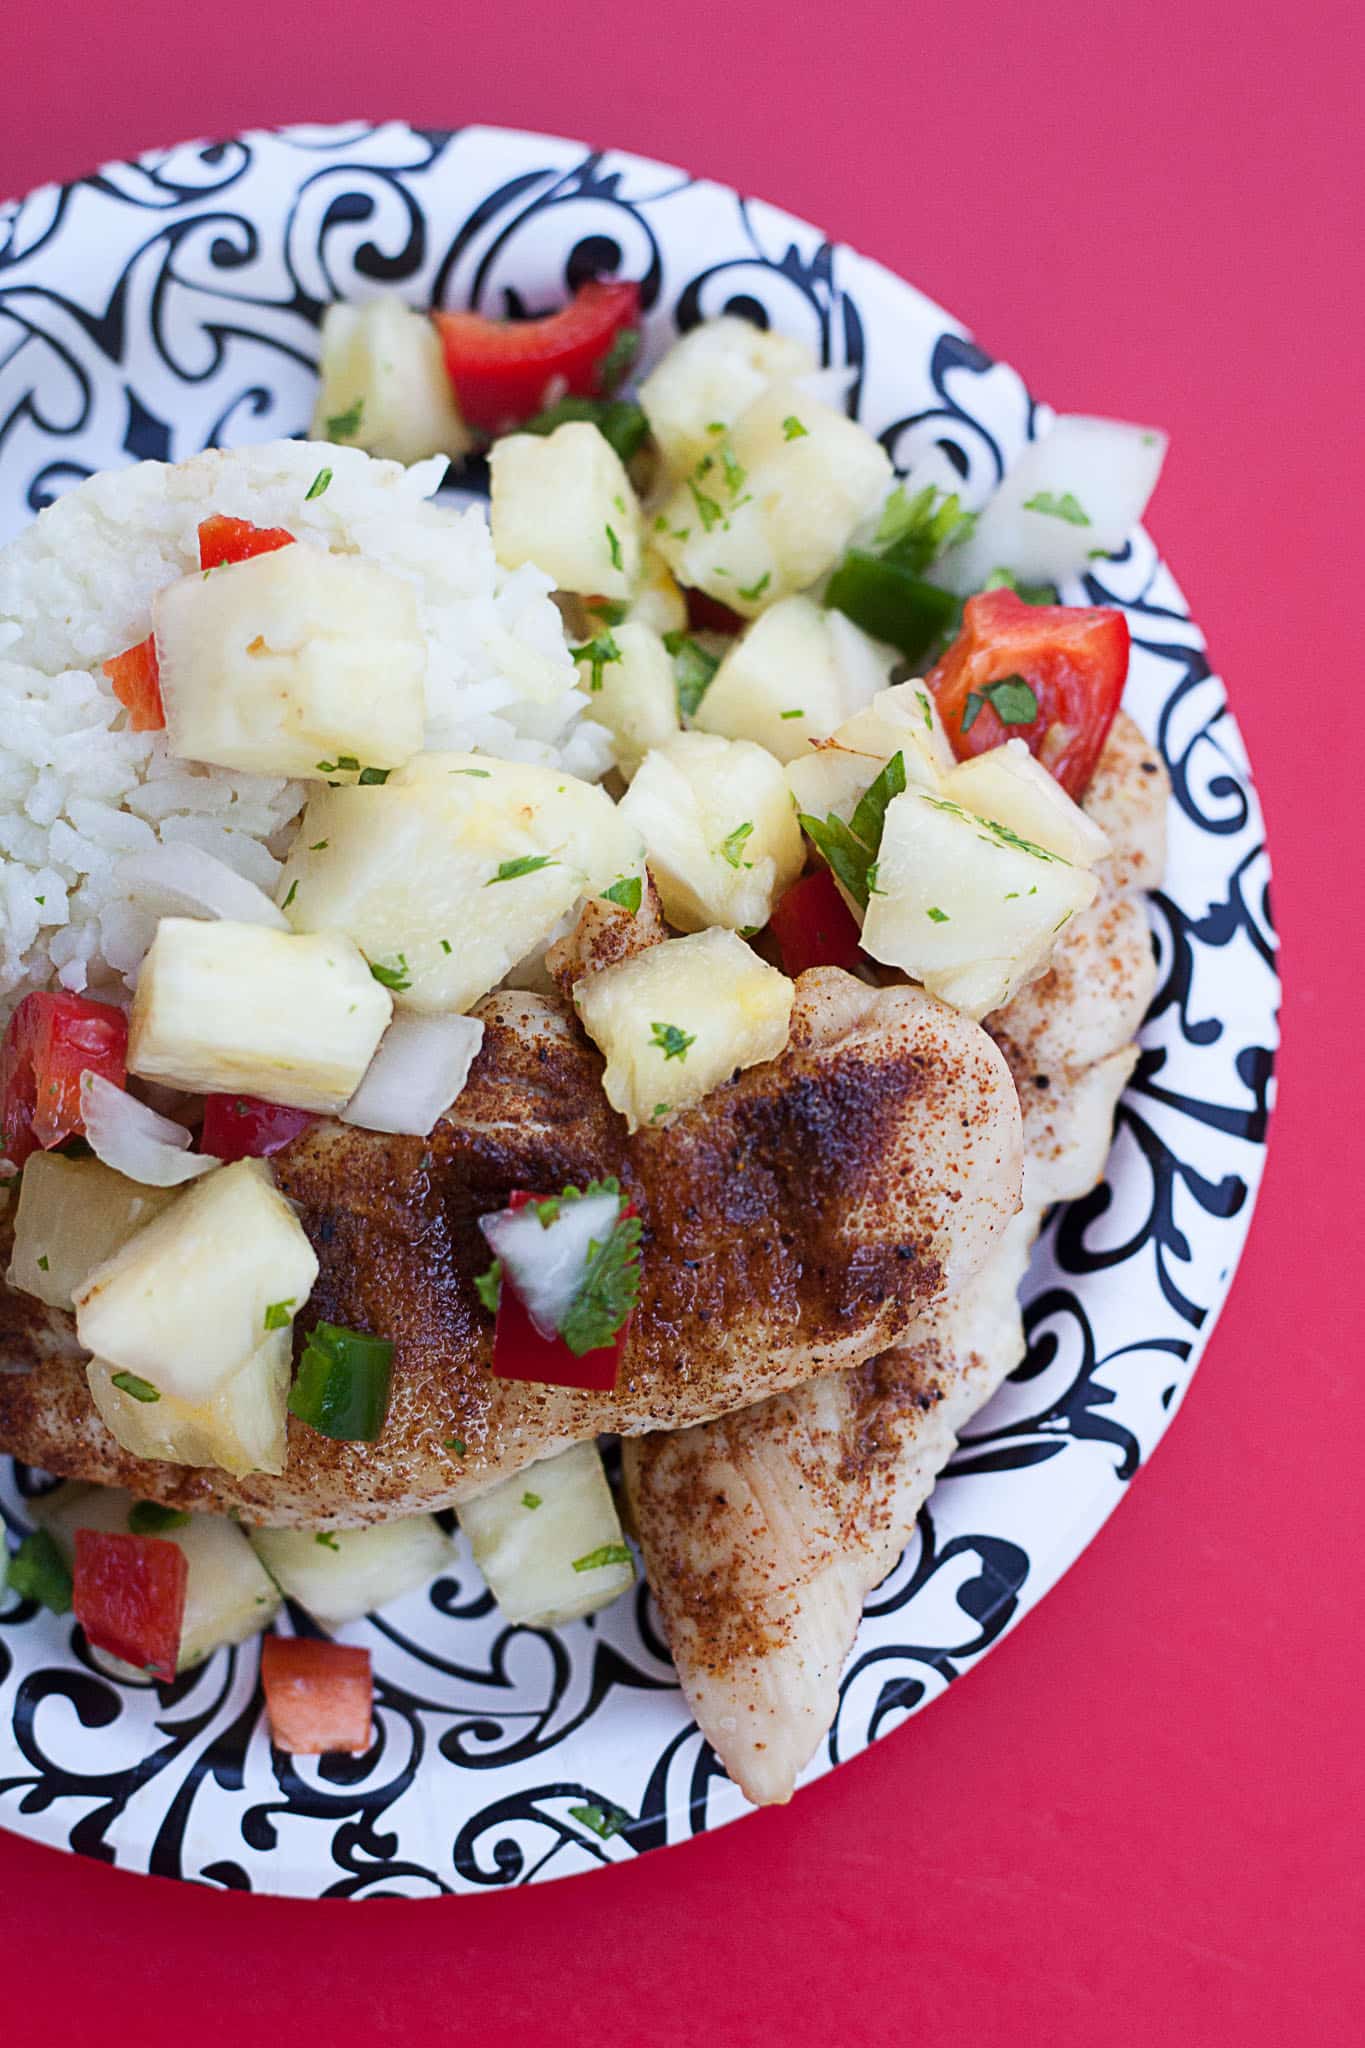 This Jamaican Jerk Chicken with pineapple salsa from Call Me Betty is fast and easy and makes a great, no fuss weeknight meal. callmebetty.com 